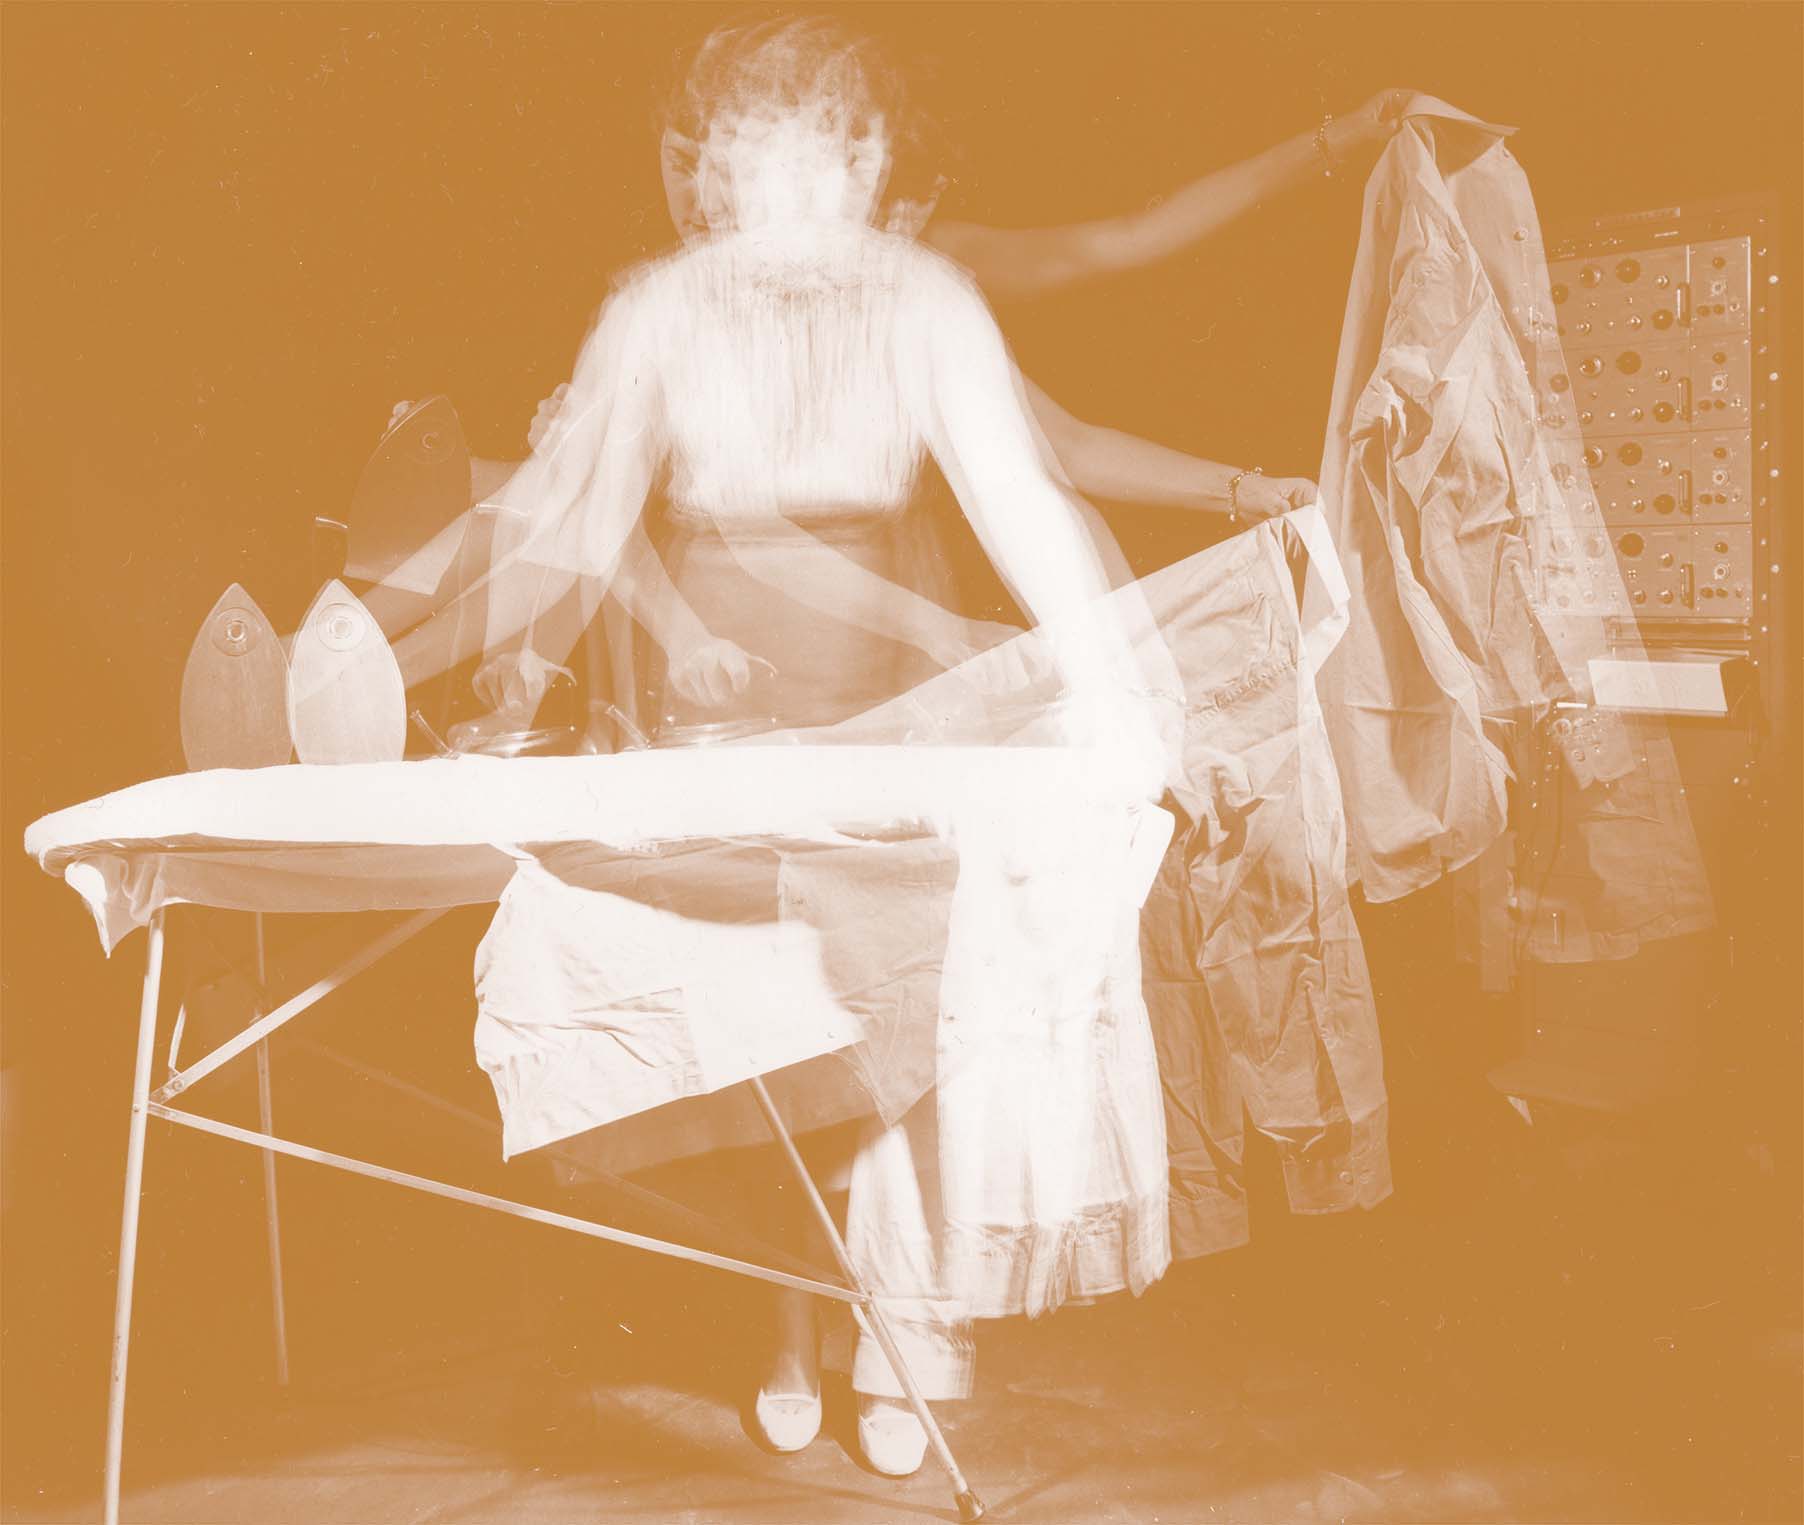 Sepia image of a woman ironing clothes on an ironing board. Image has a long exposure to show movement